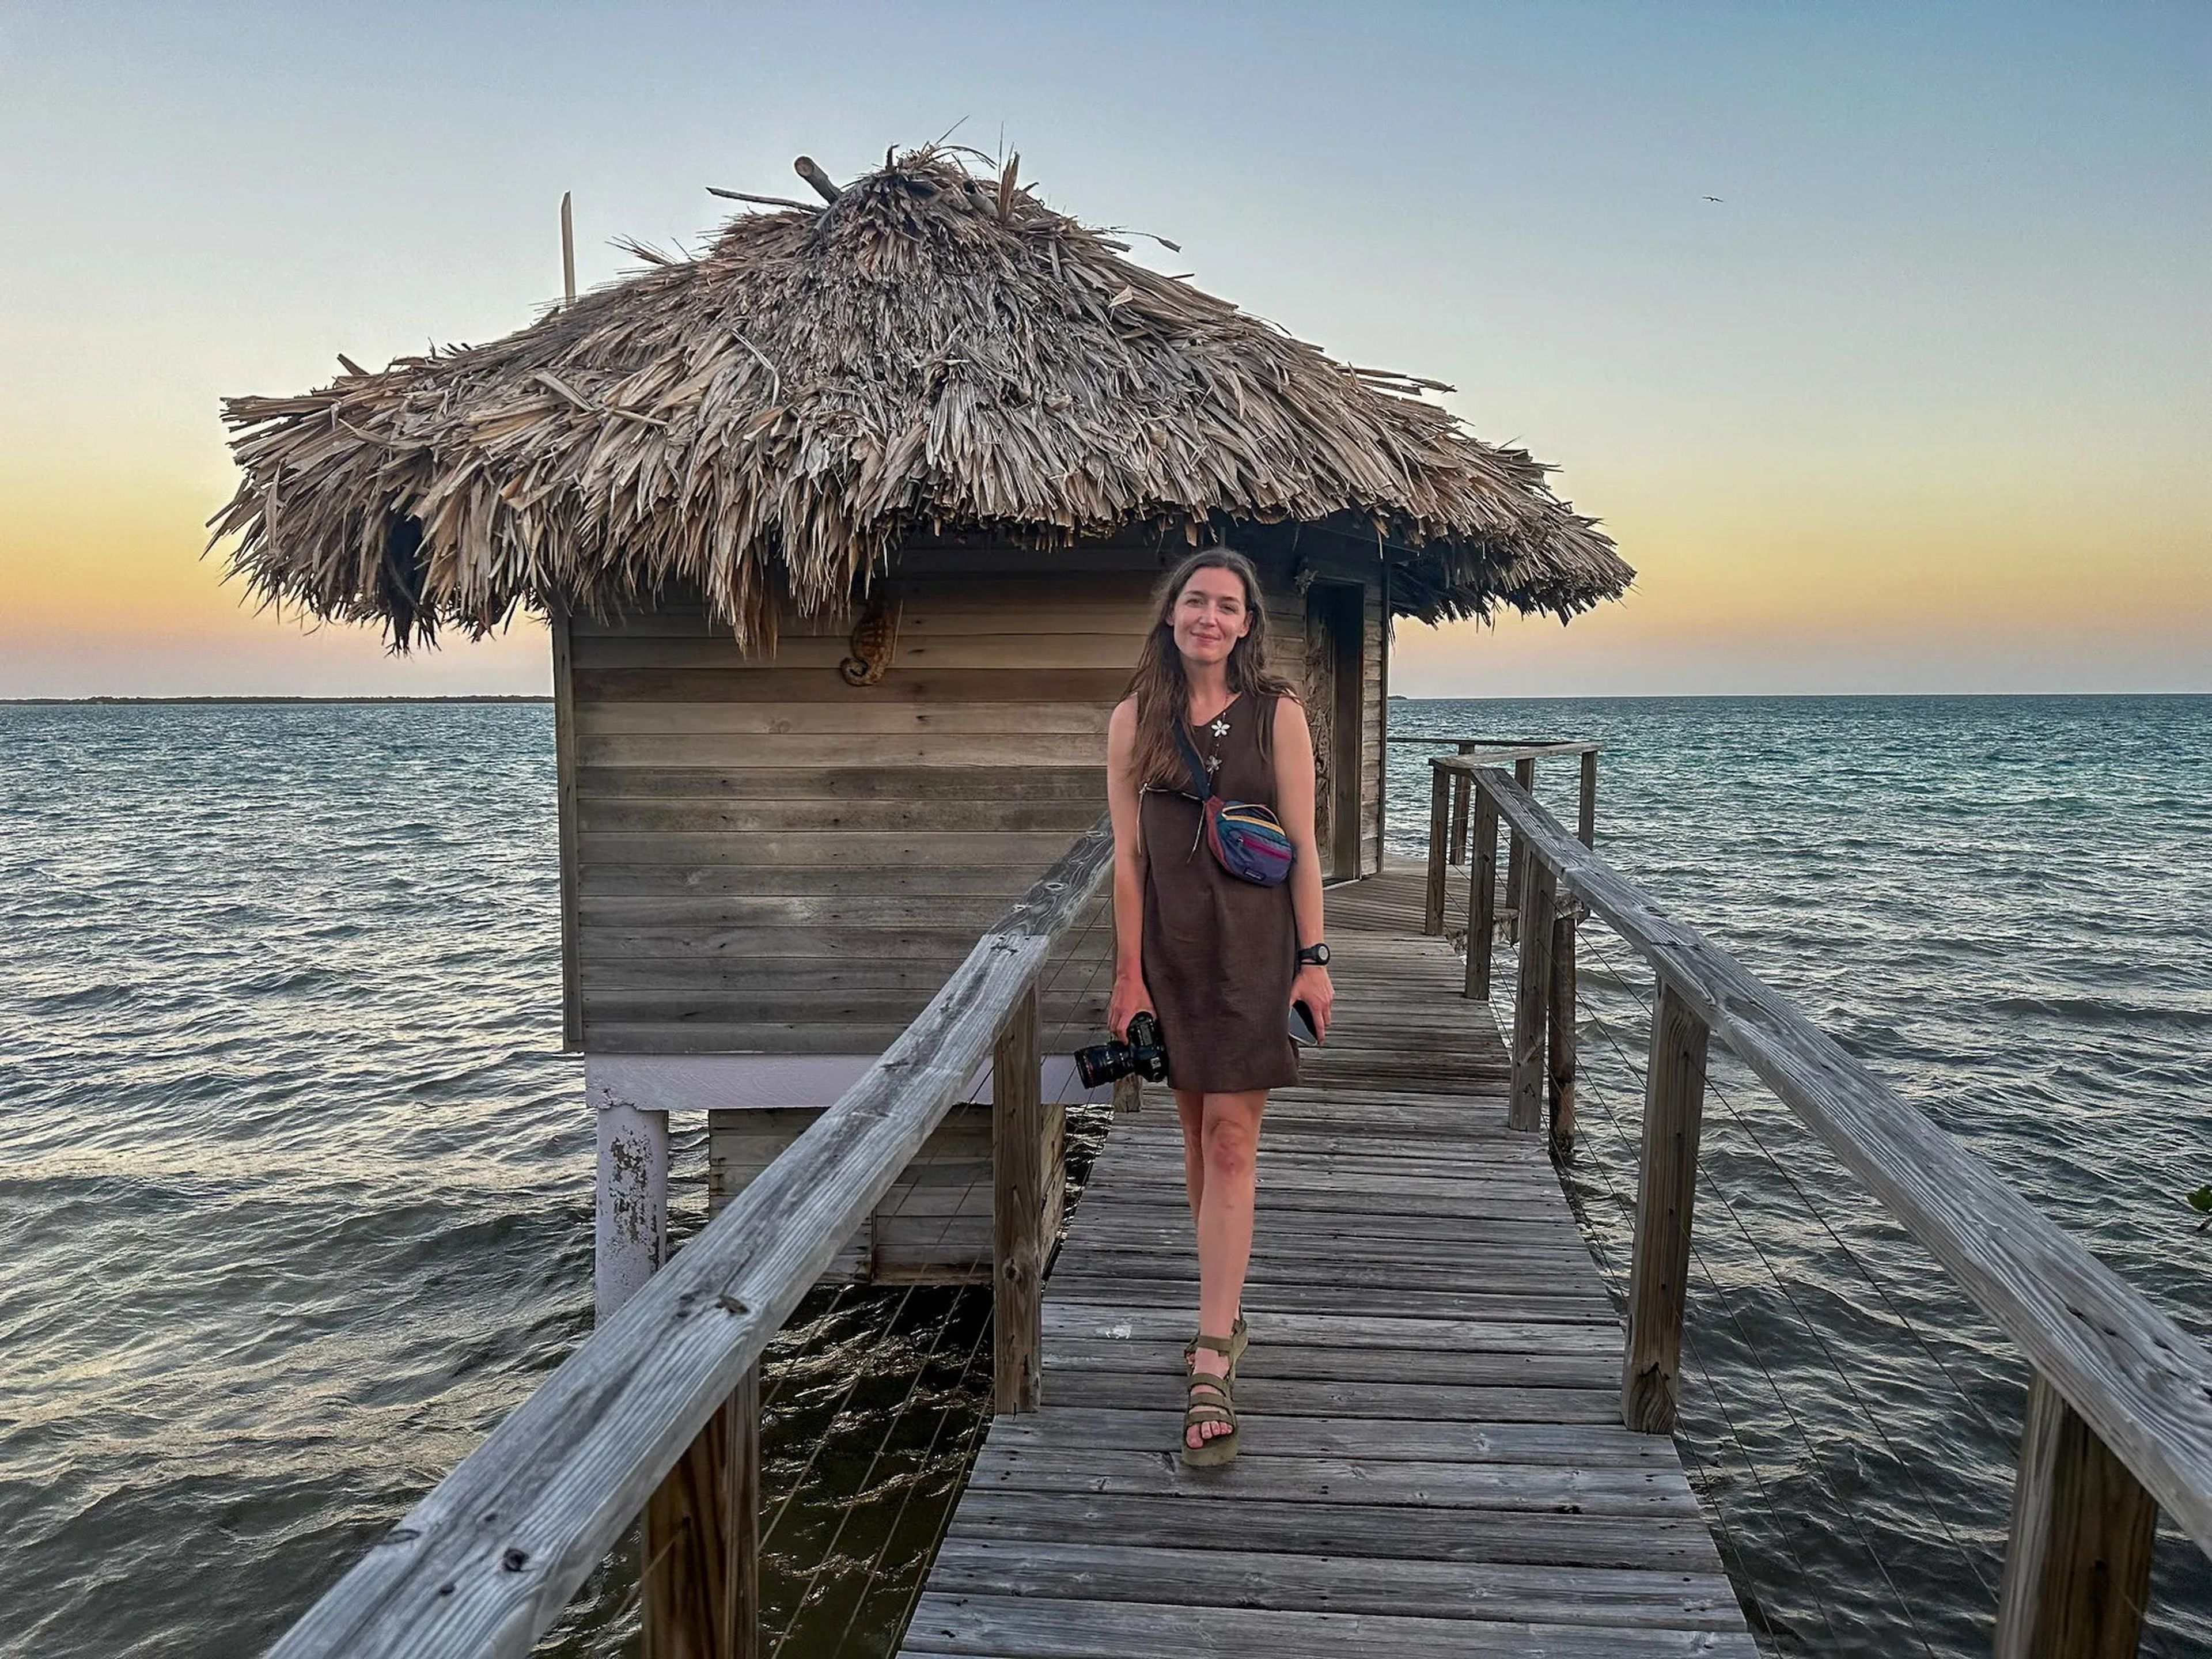 The author at the Thatch Caye resort in Belize.